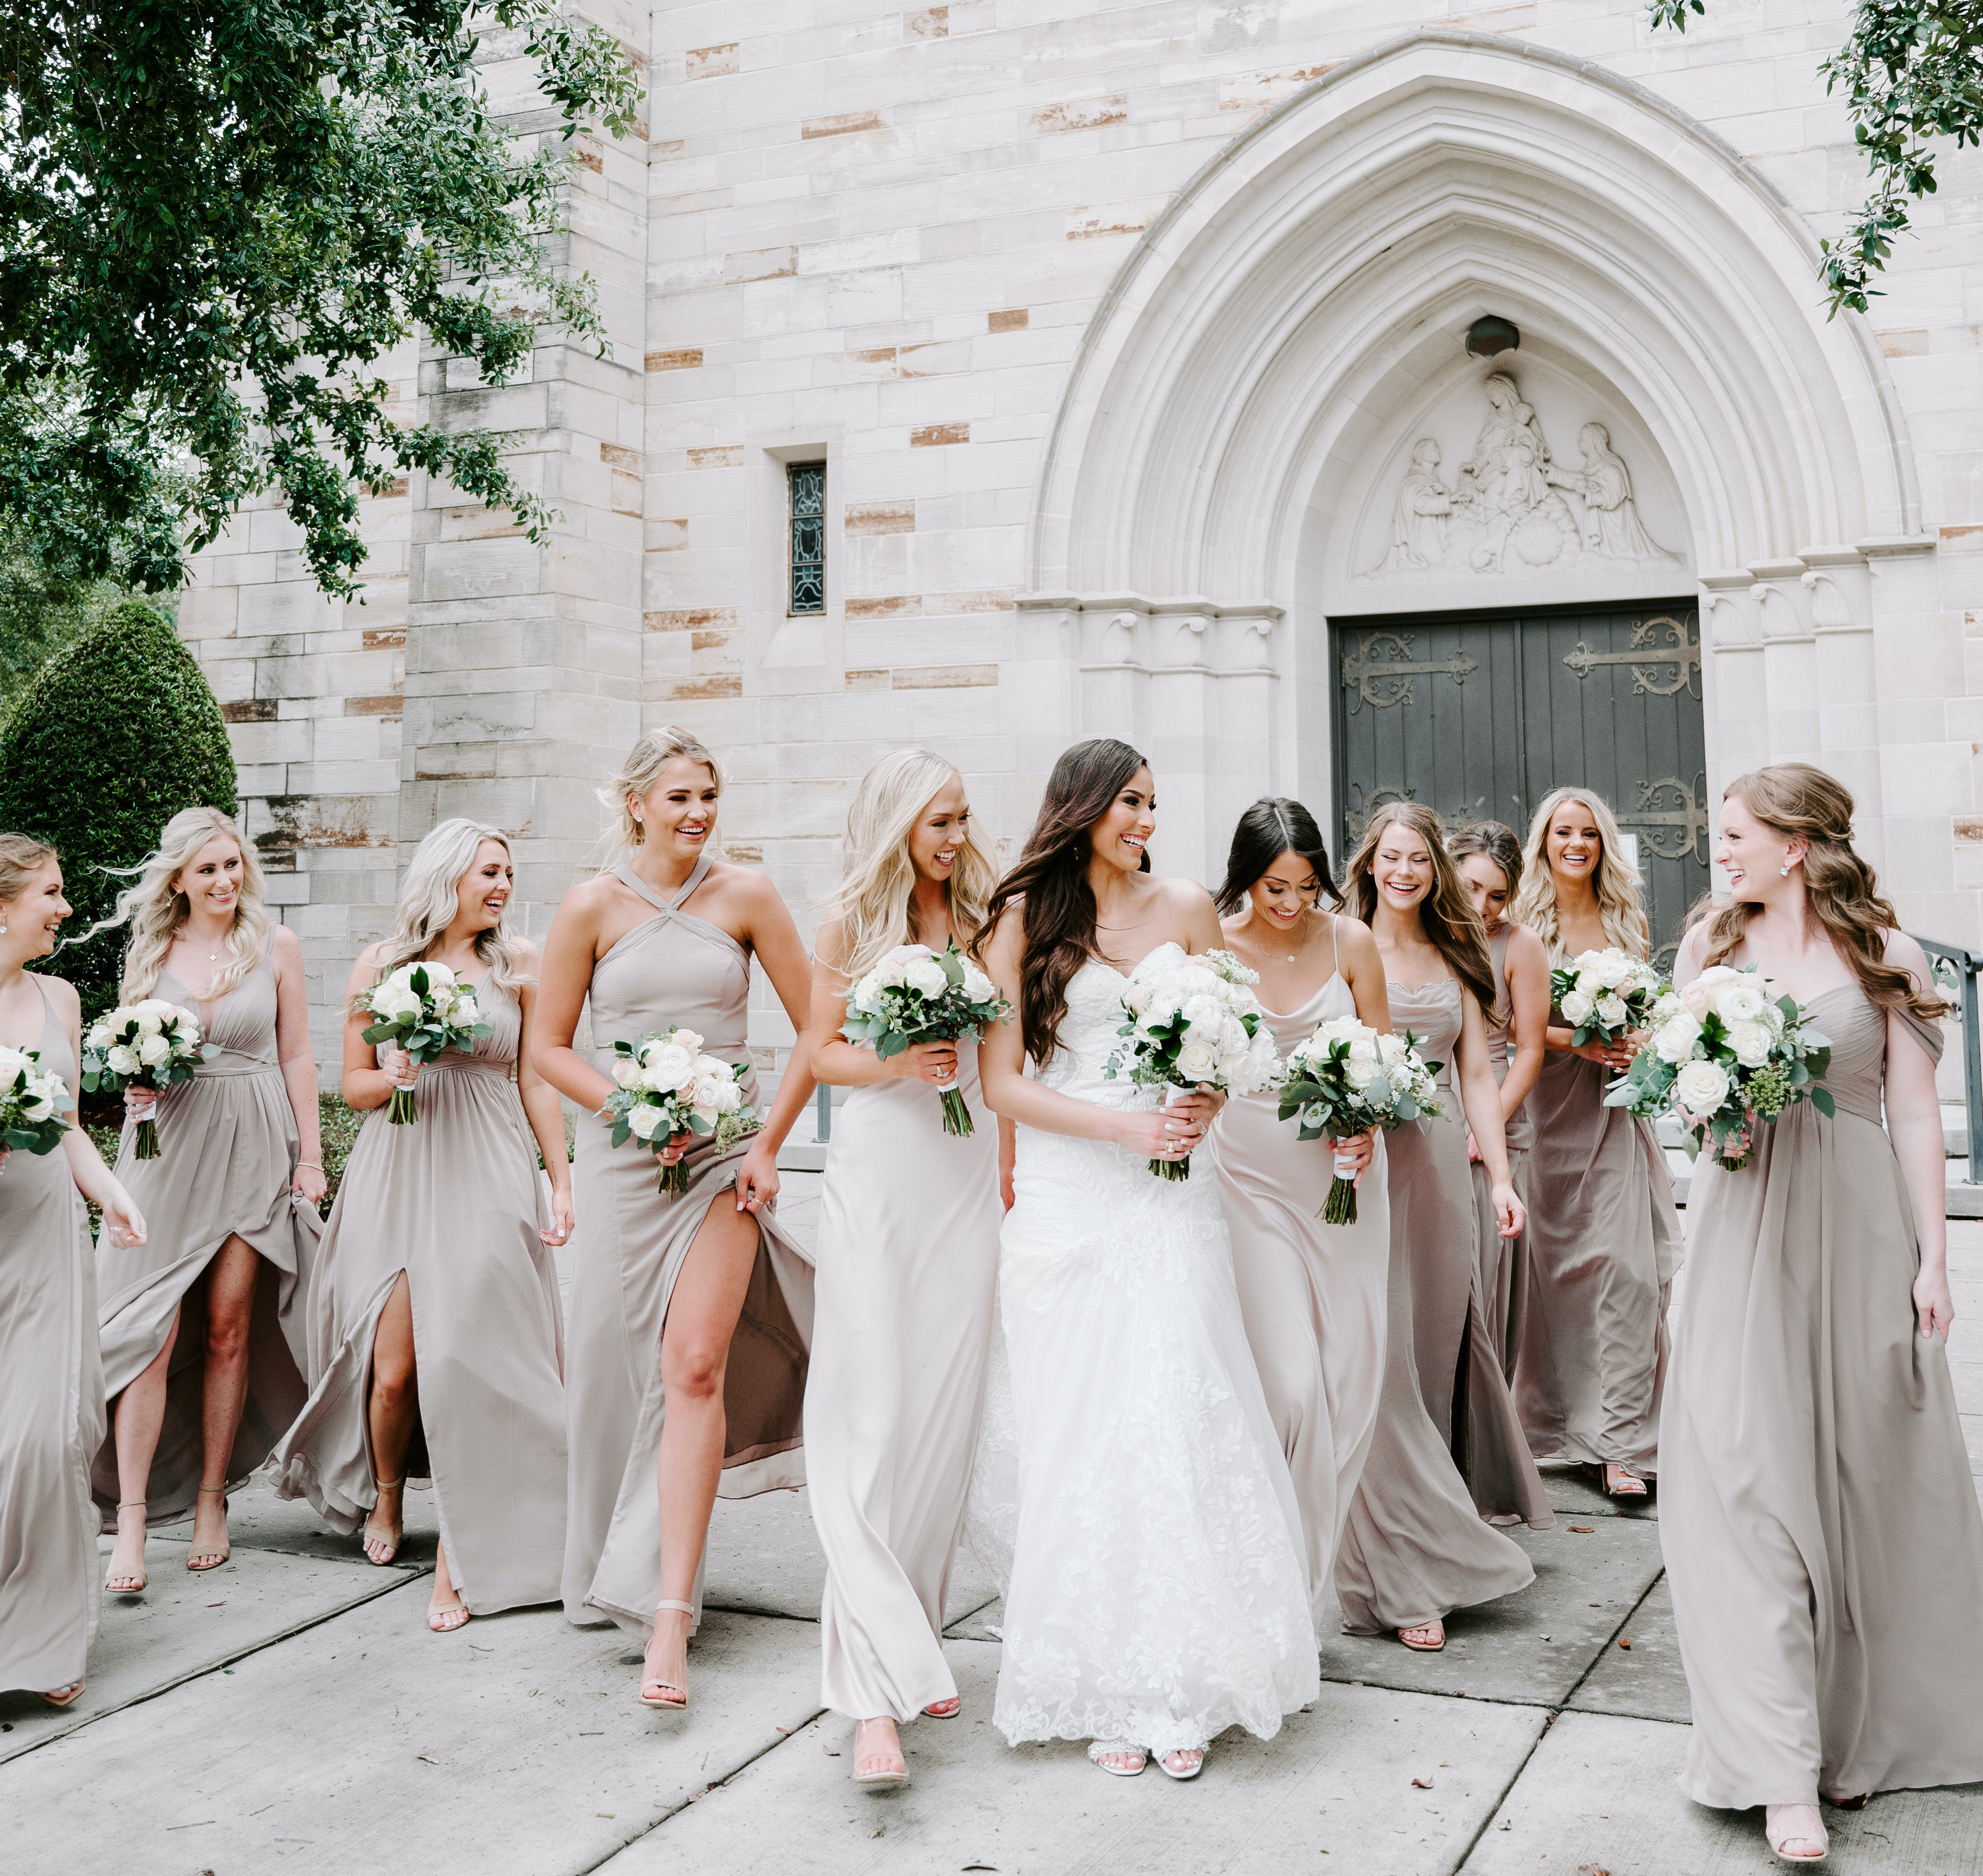 The bride and her bridesmaids are walking and laughing with one another.